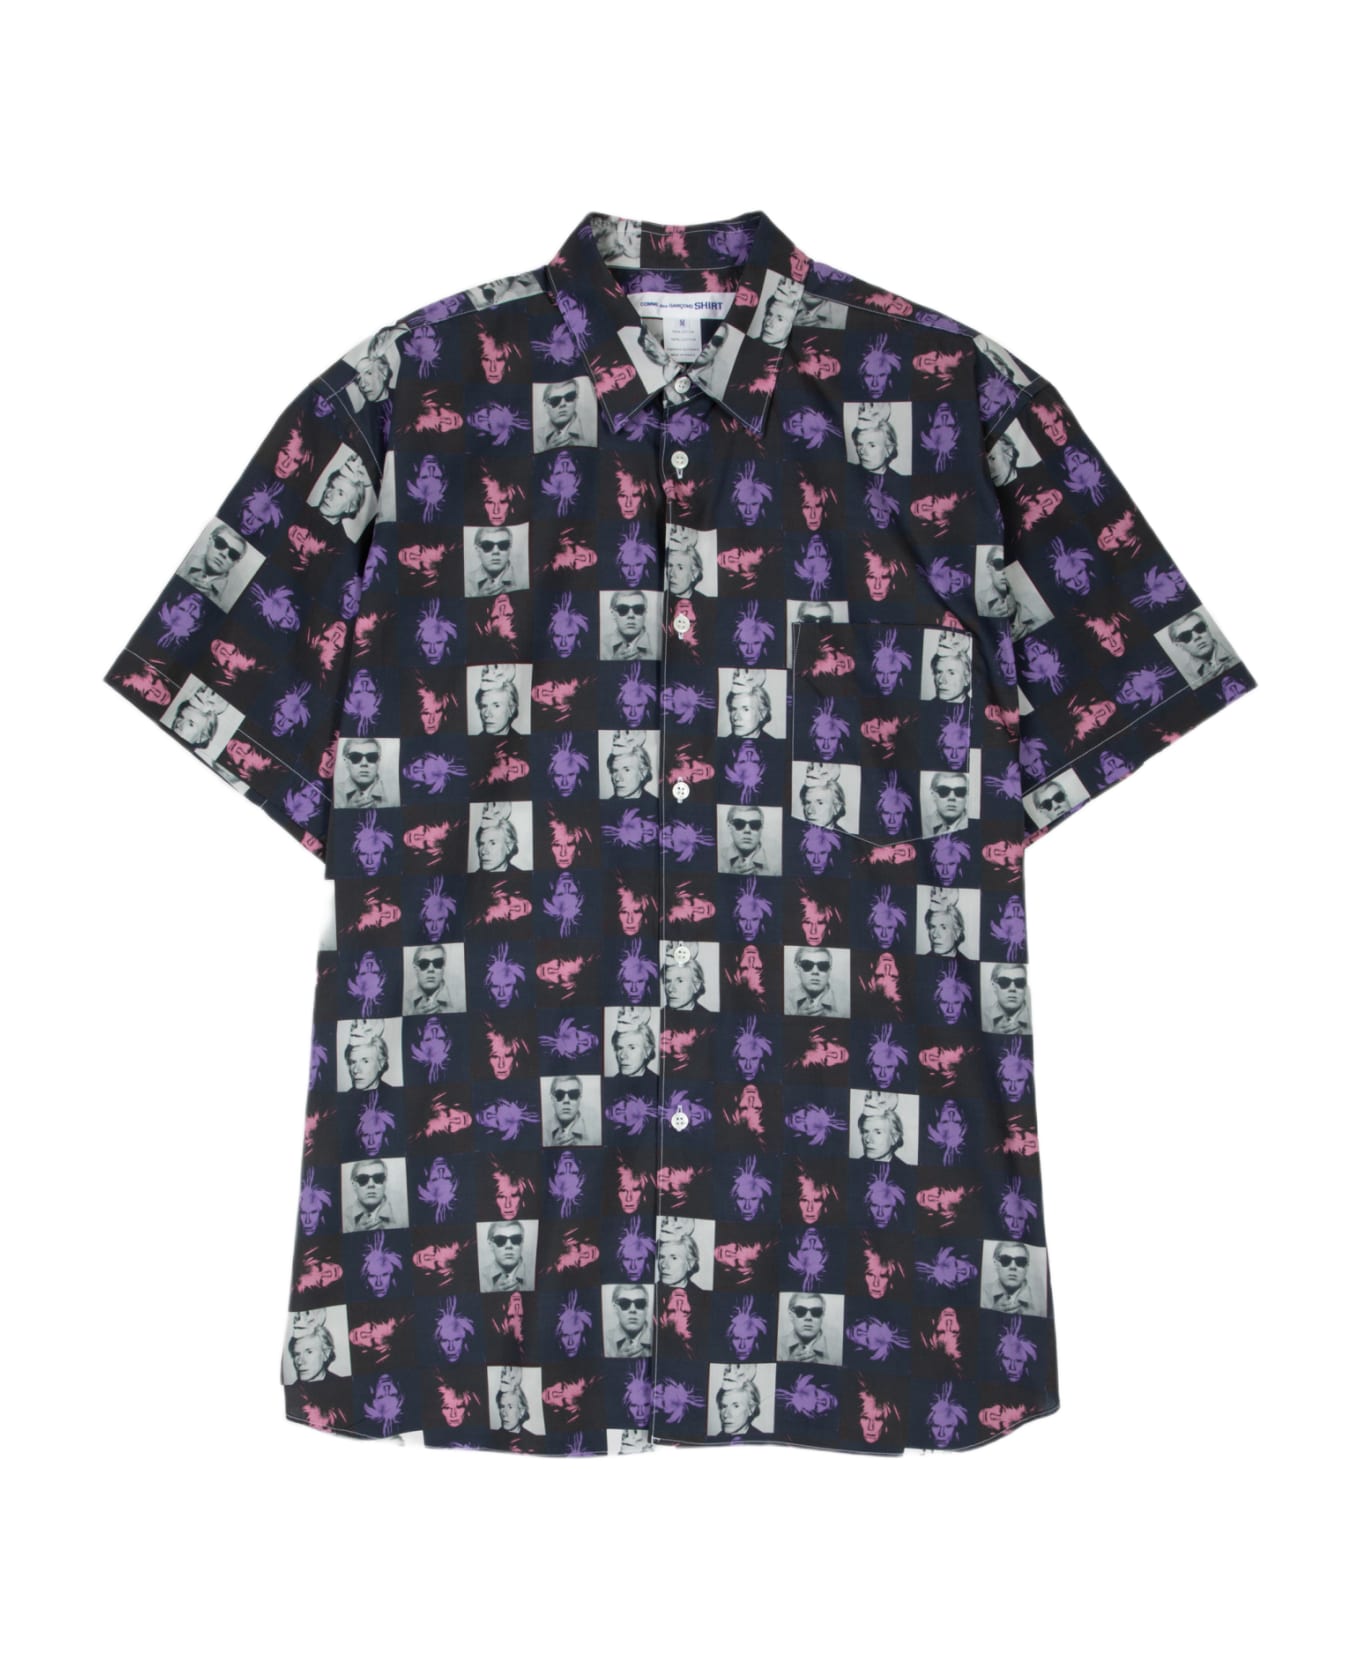 Comme des Garçons Shirt Mens Shirt Woven Multicolour Andy Warhol printed shirt with short sleeves - Multicolor シャツ